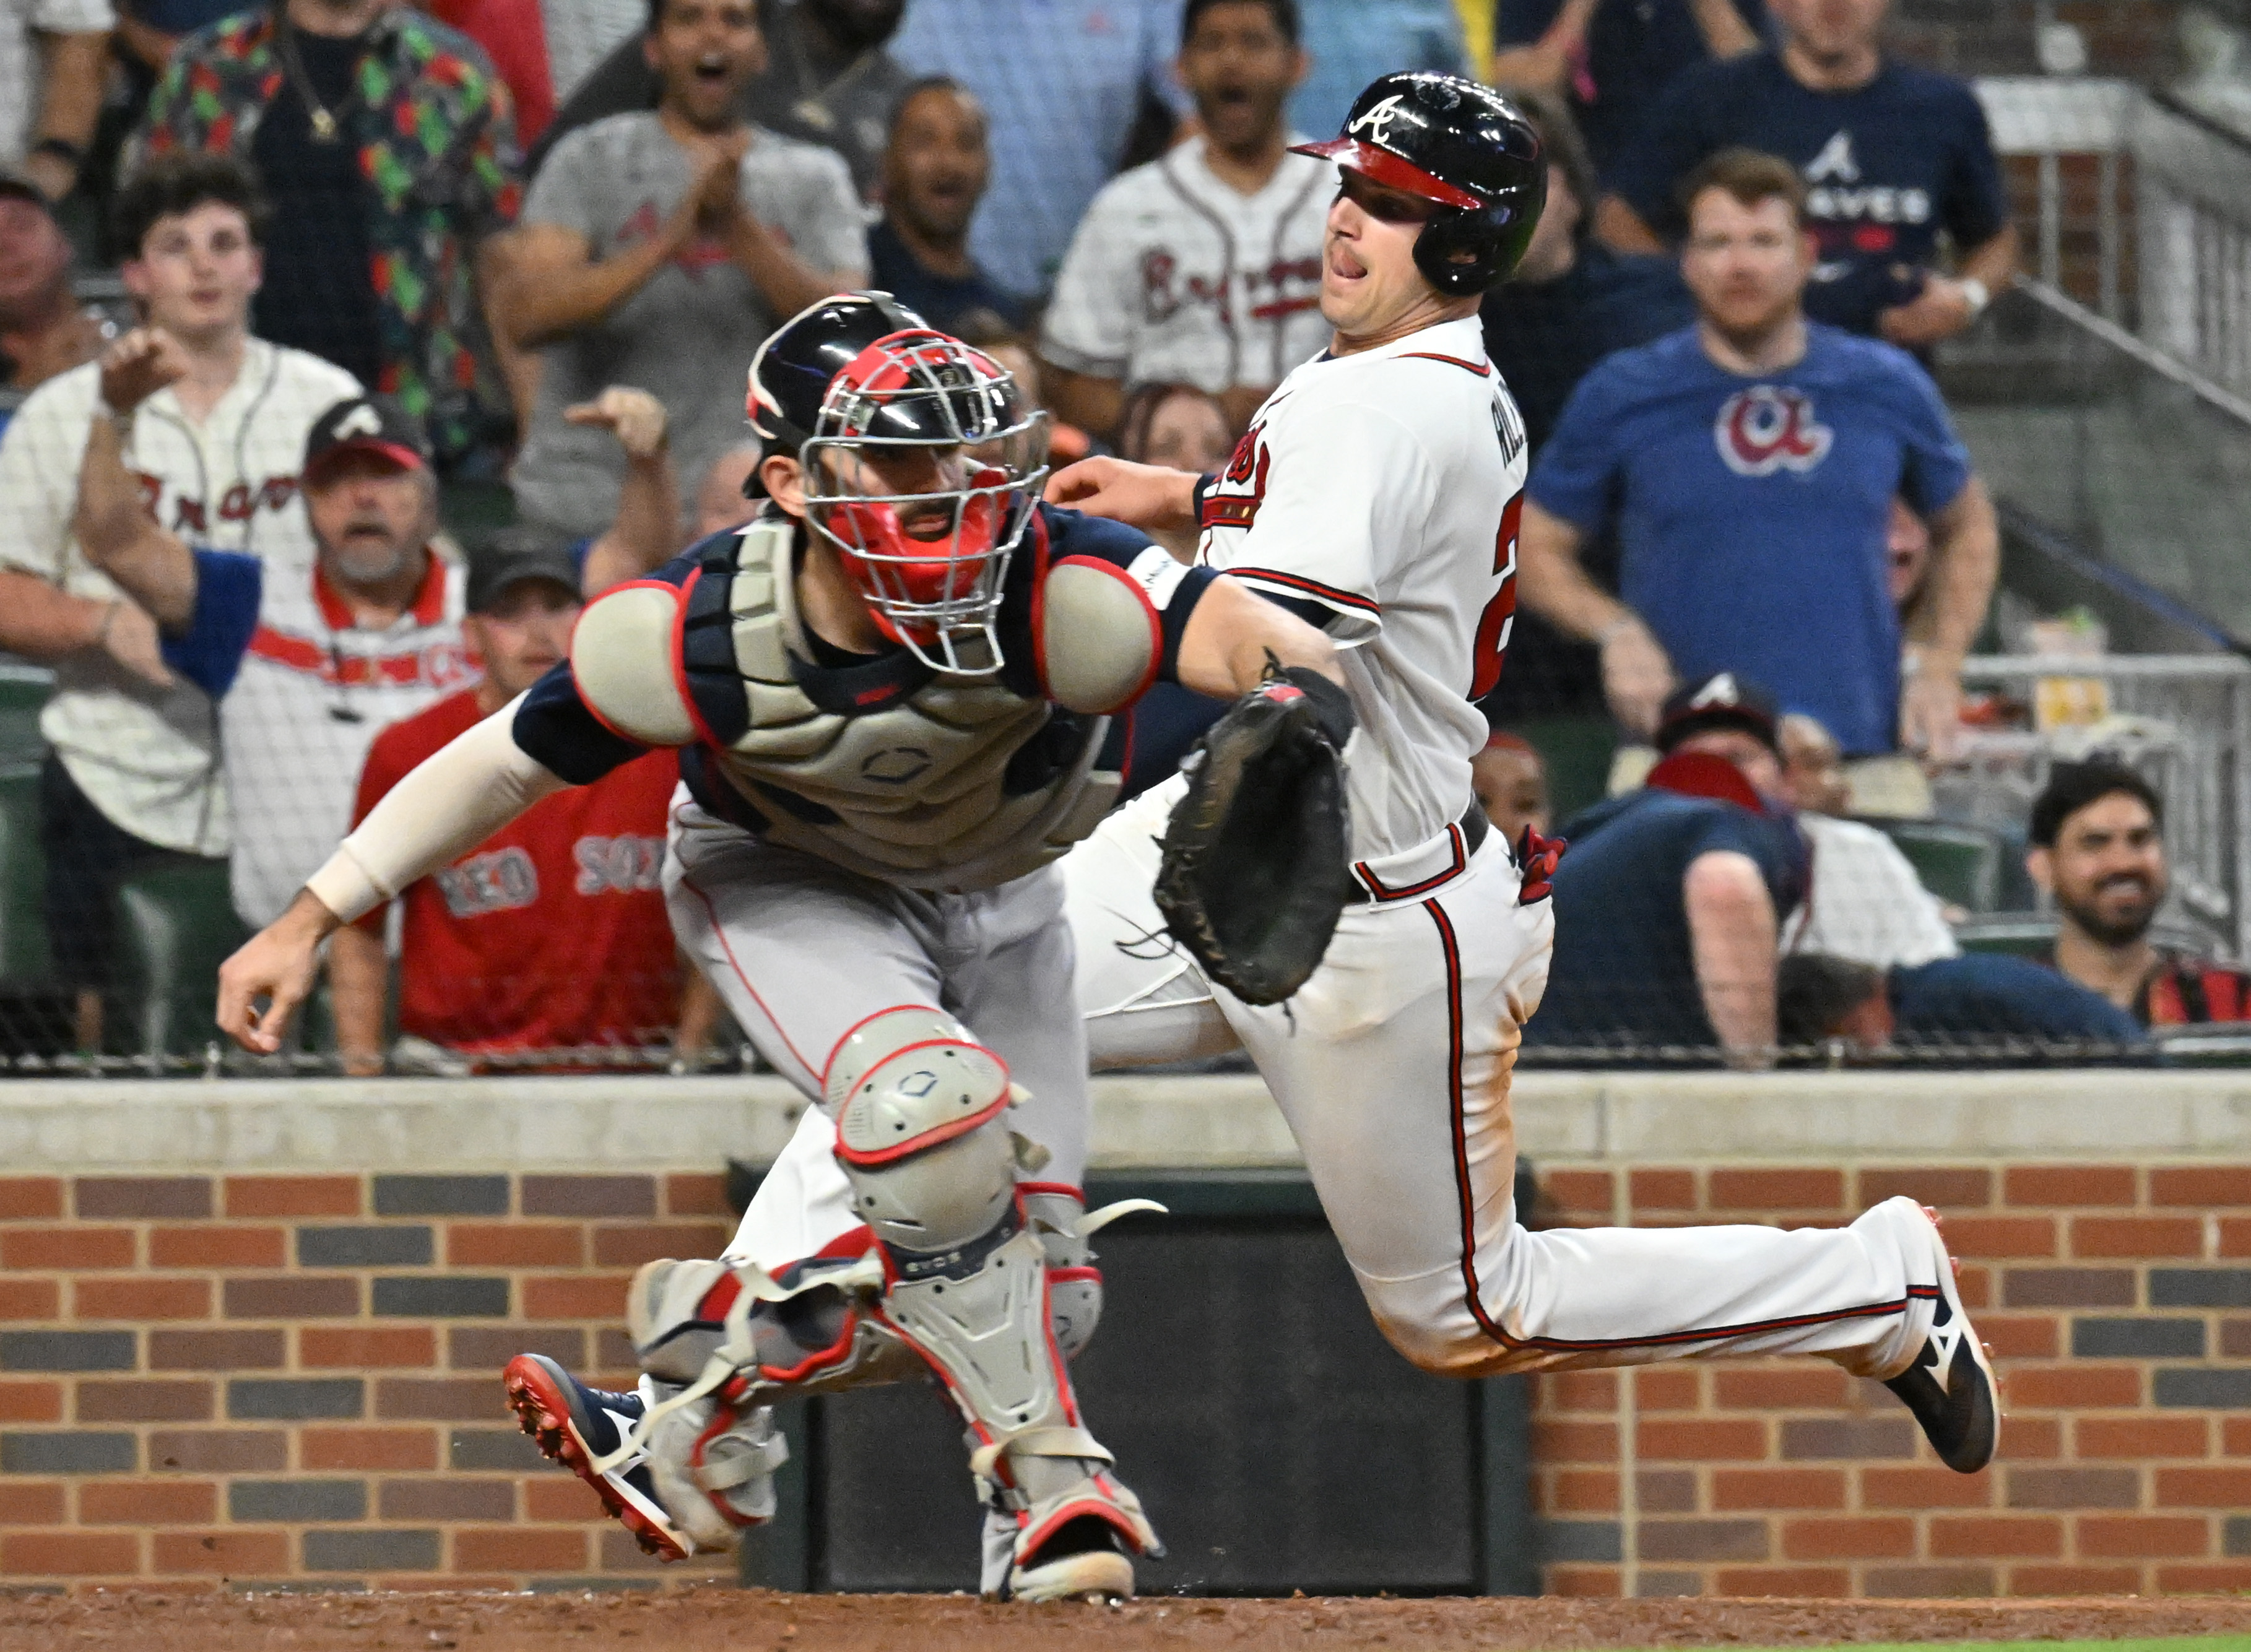 Braves' bullpen game starts well but ends with loss to Red Sox